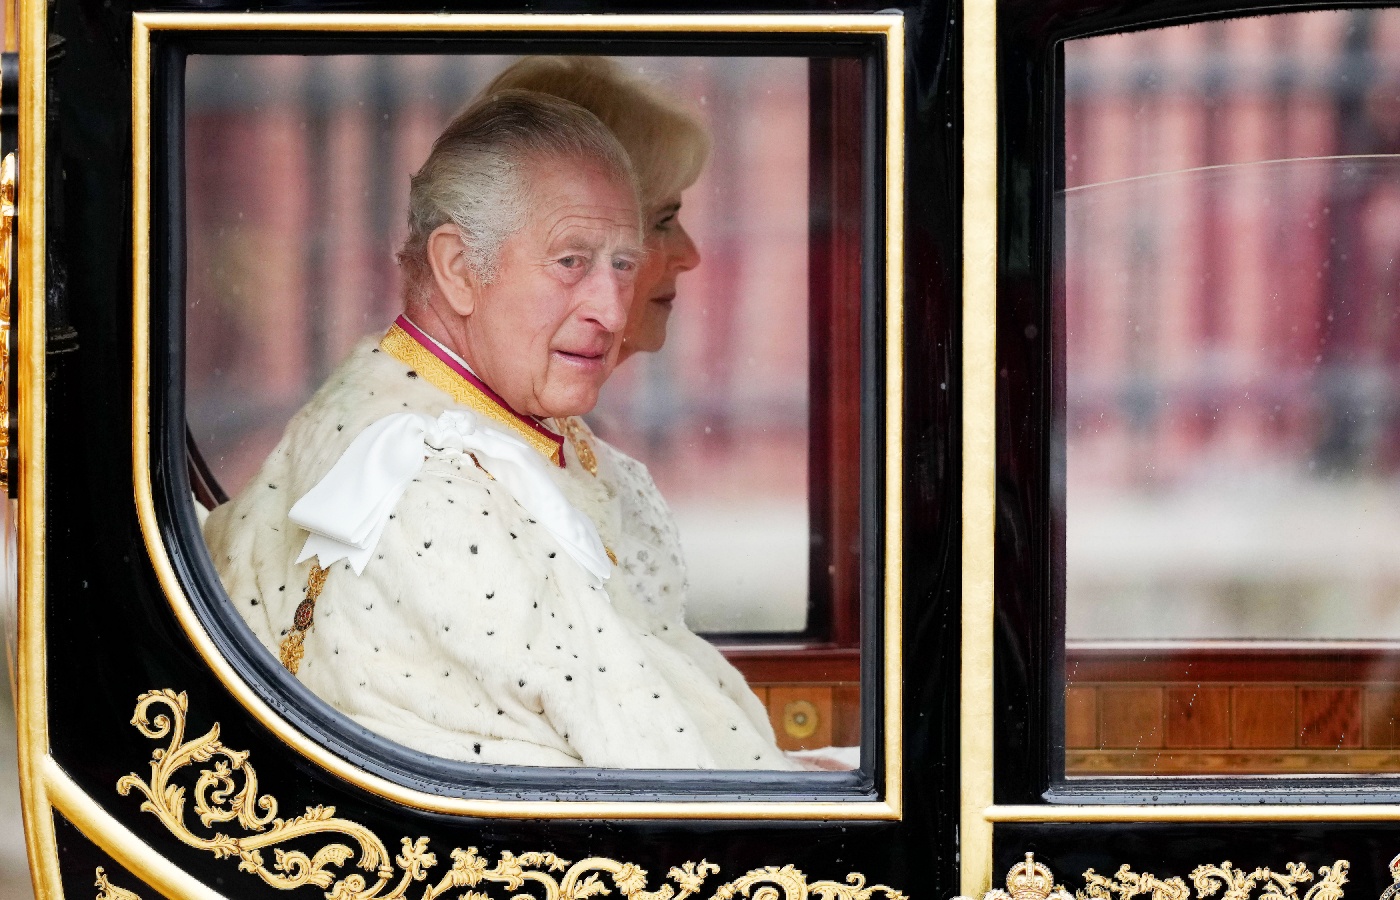 King Charles III and Camilla, Queen Consort travelling in the Diamond Jubilee Coach built in 2012 to commemorate the 60th anniversary of the reign of Queen Elizabeth.